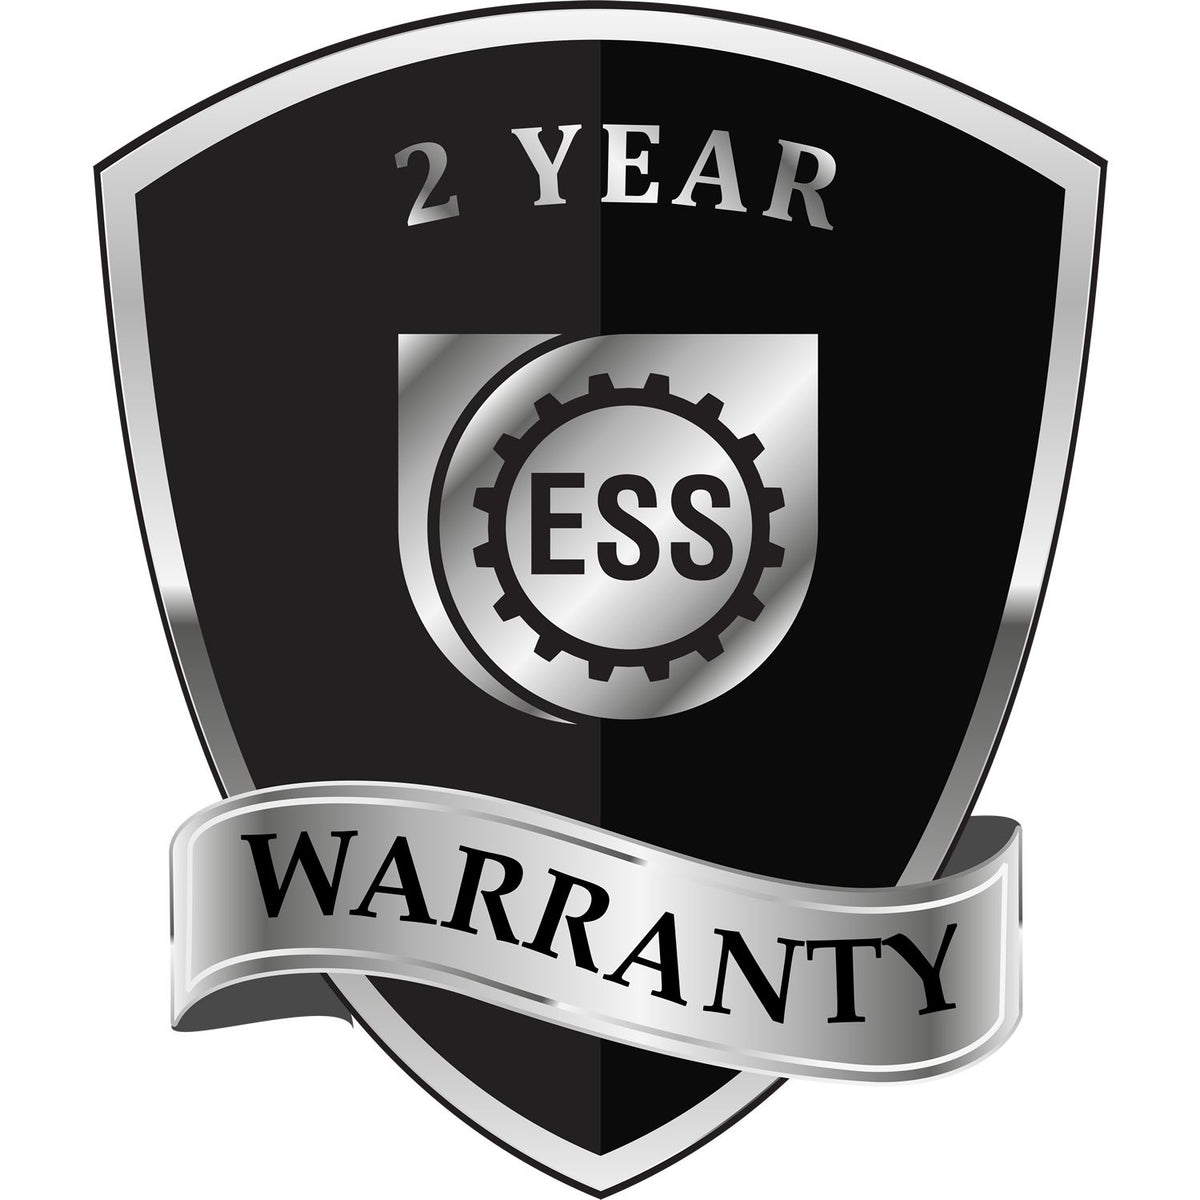 A badge or emblem showing a warranty icon for the Long Reach Maryland PE Seal